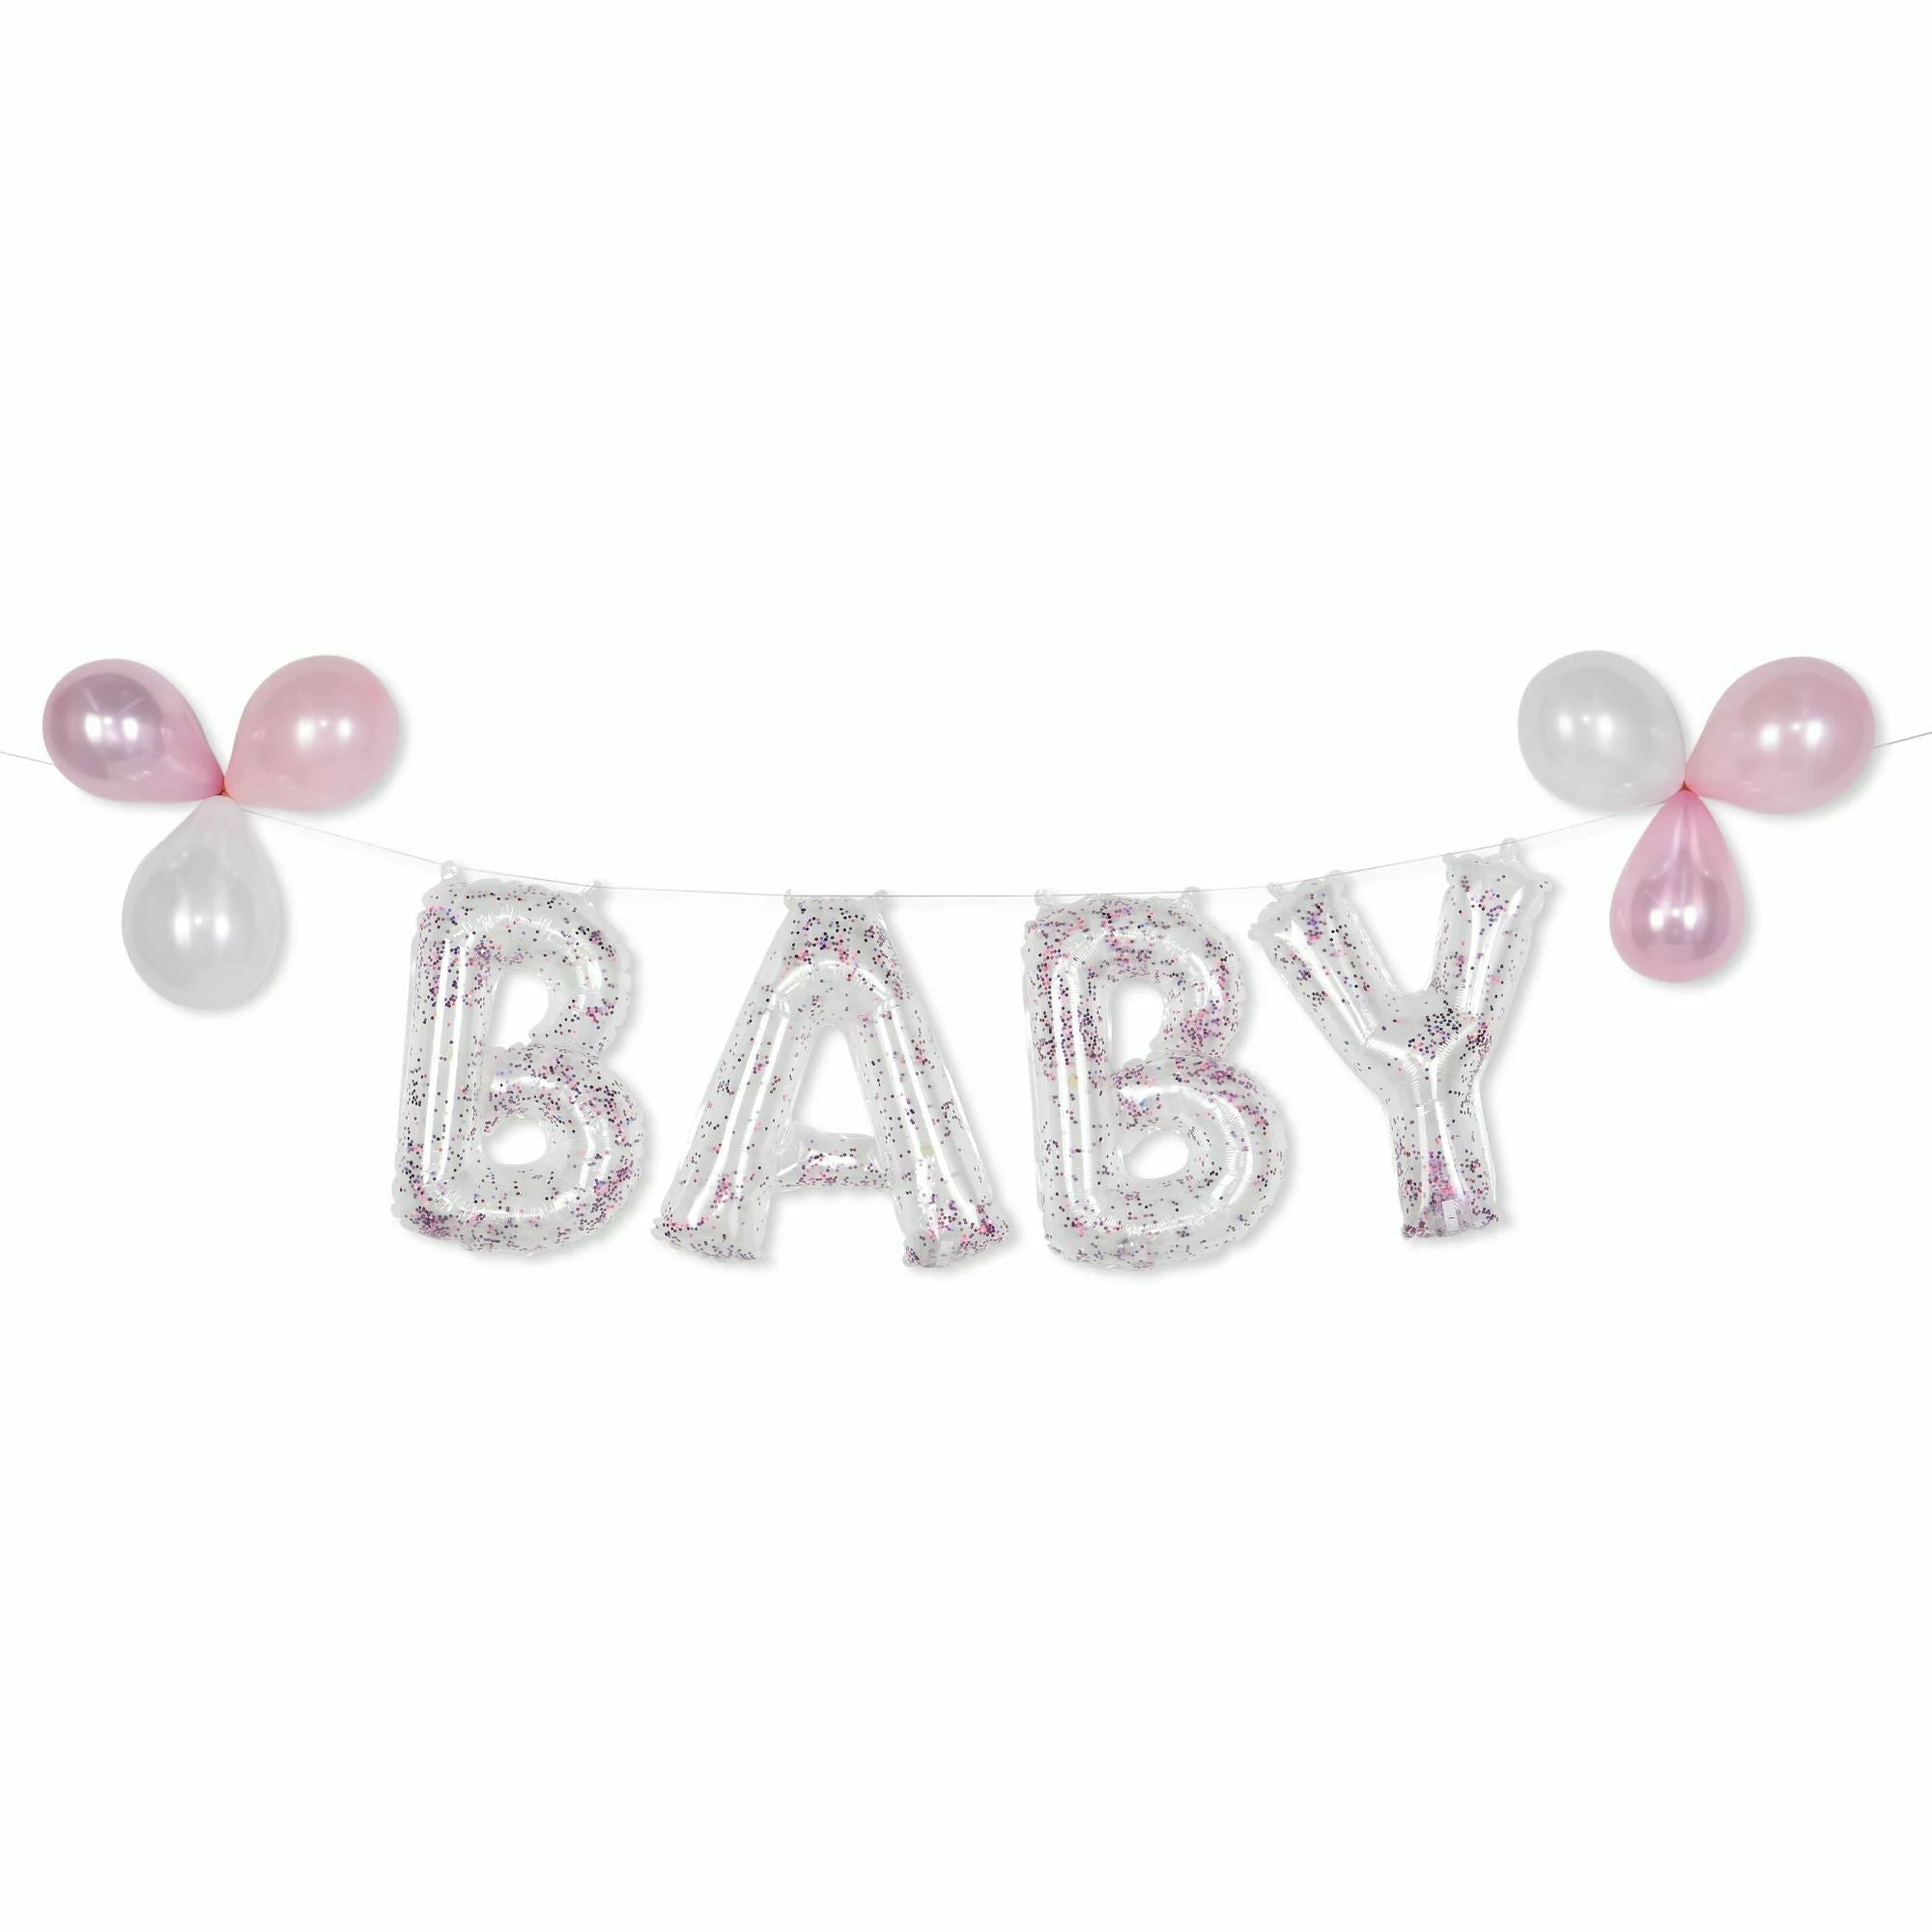 Amscan BALLOONS "Baby" Glitter Confetti Air Filled Balloon Banner Kit - Pink